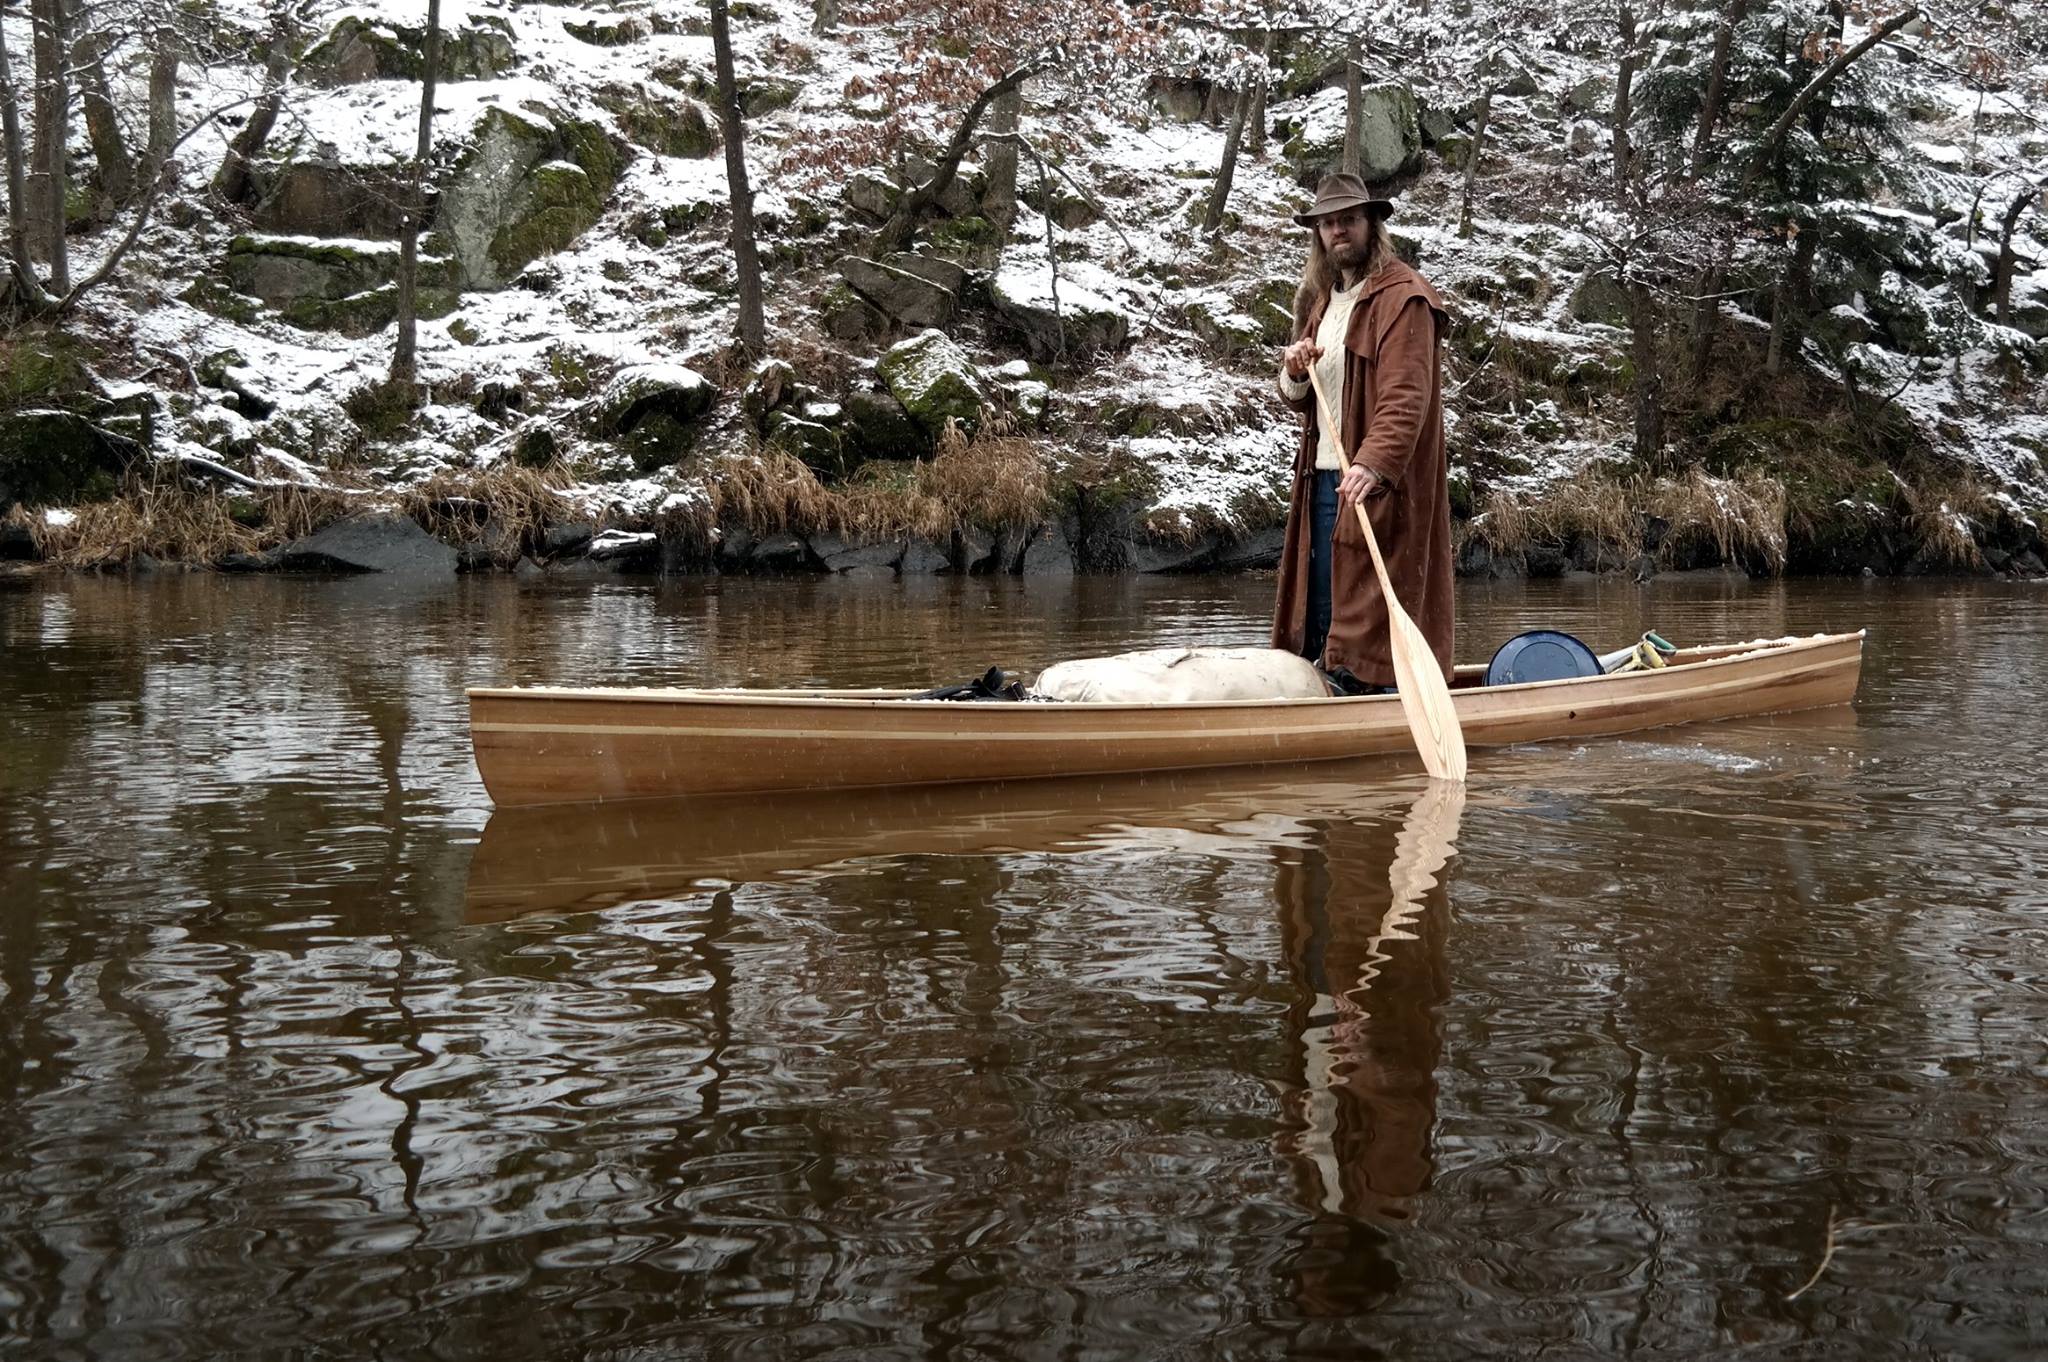 Ashes Solo Quick – 16.5′ Canoe